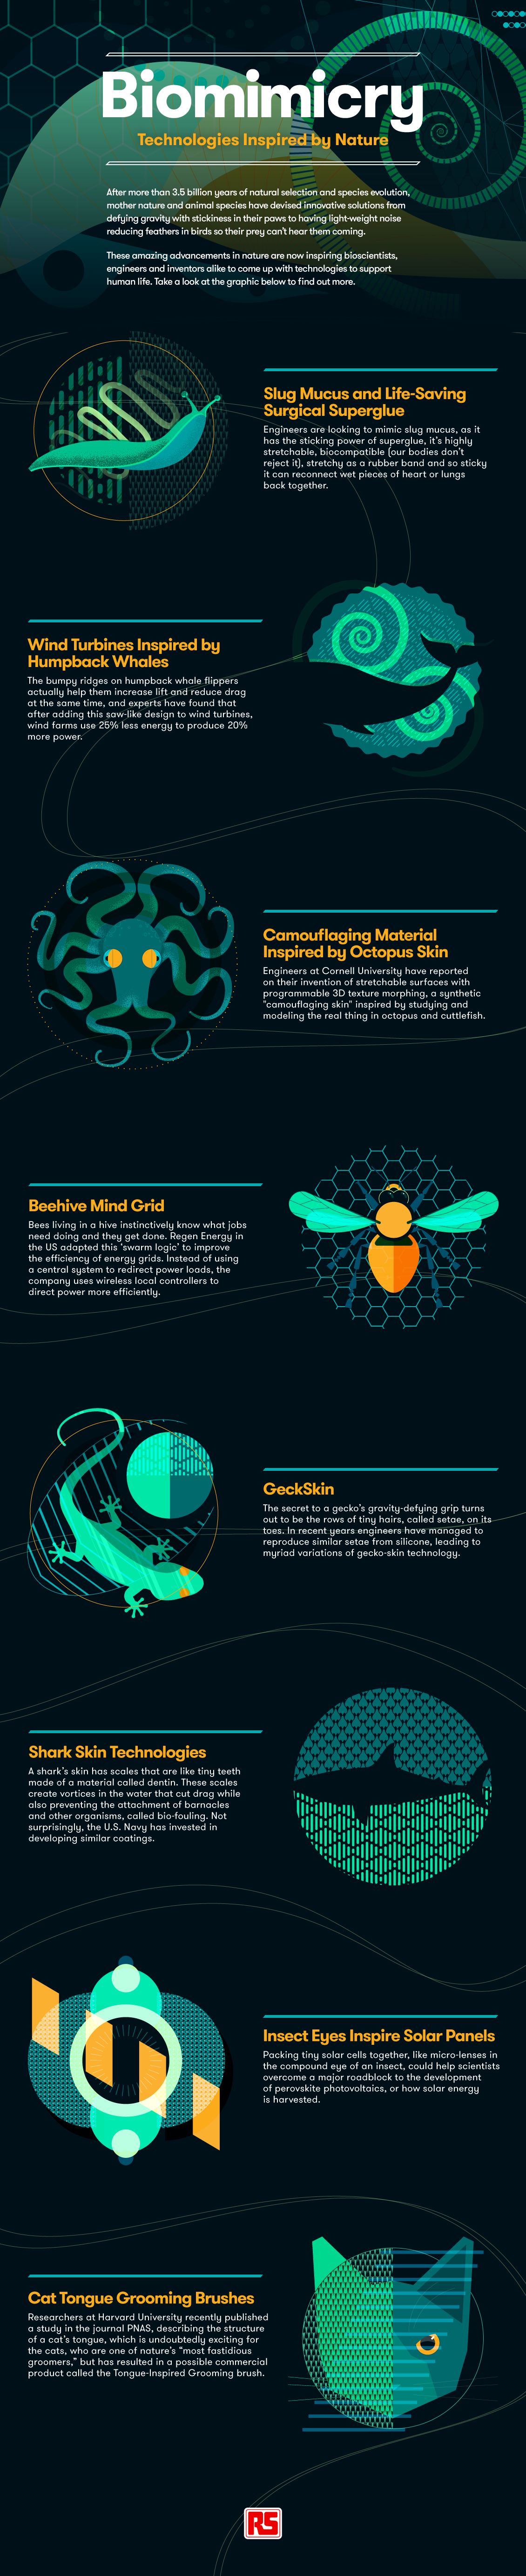 Biomimicry infographic showing technologies inspired by nature